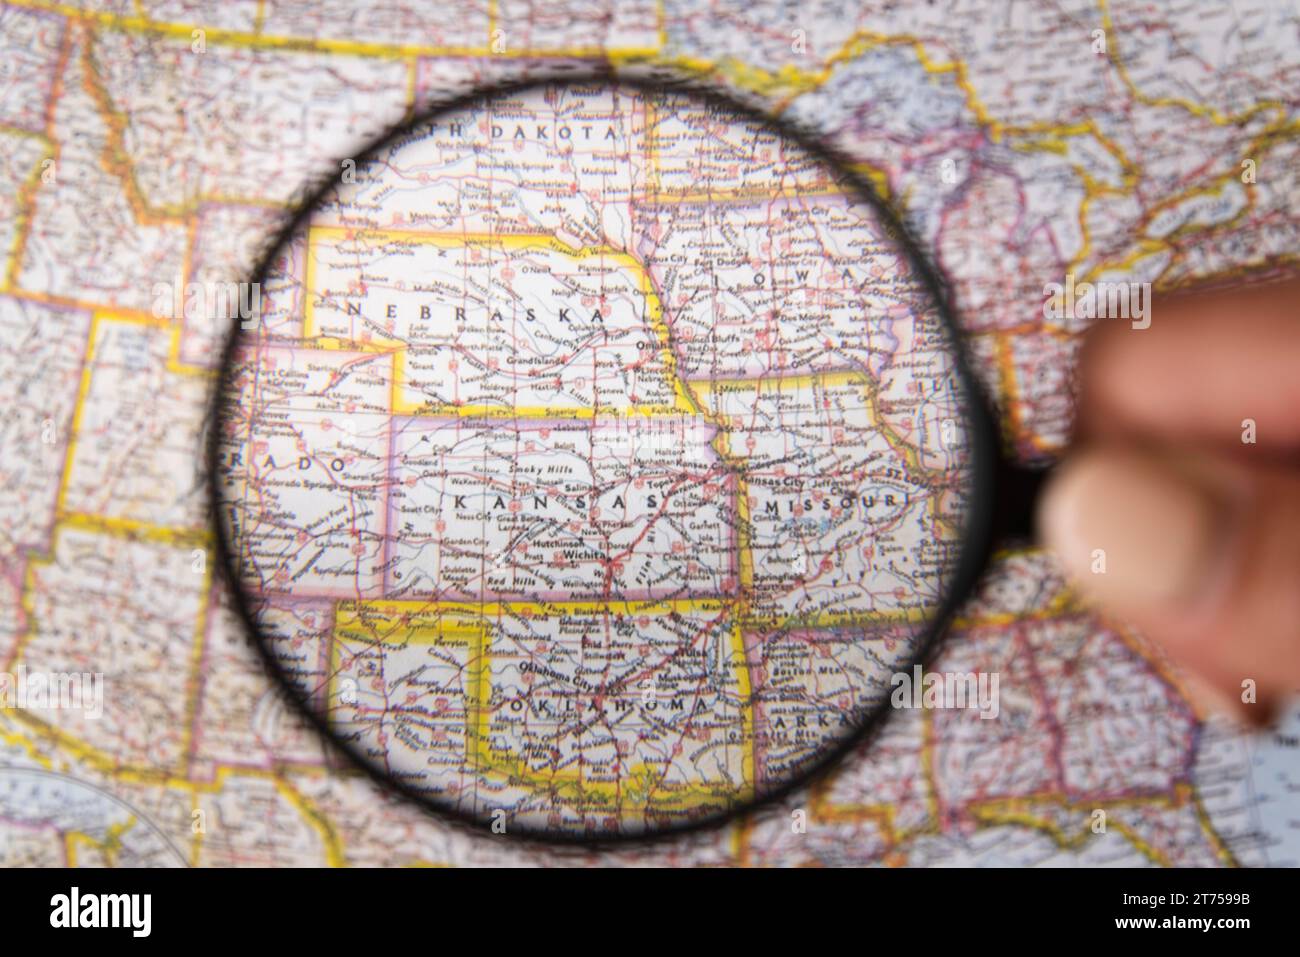 Close up magnifying glass showing places map Stock Photo